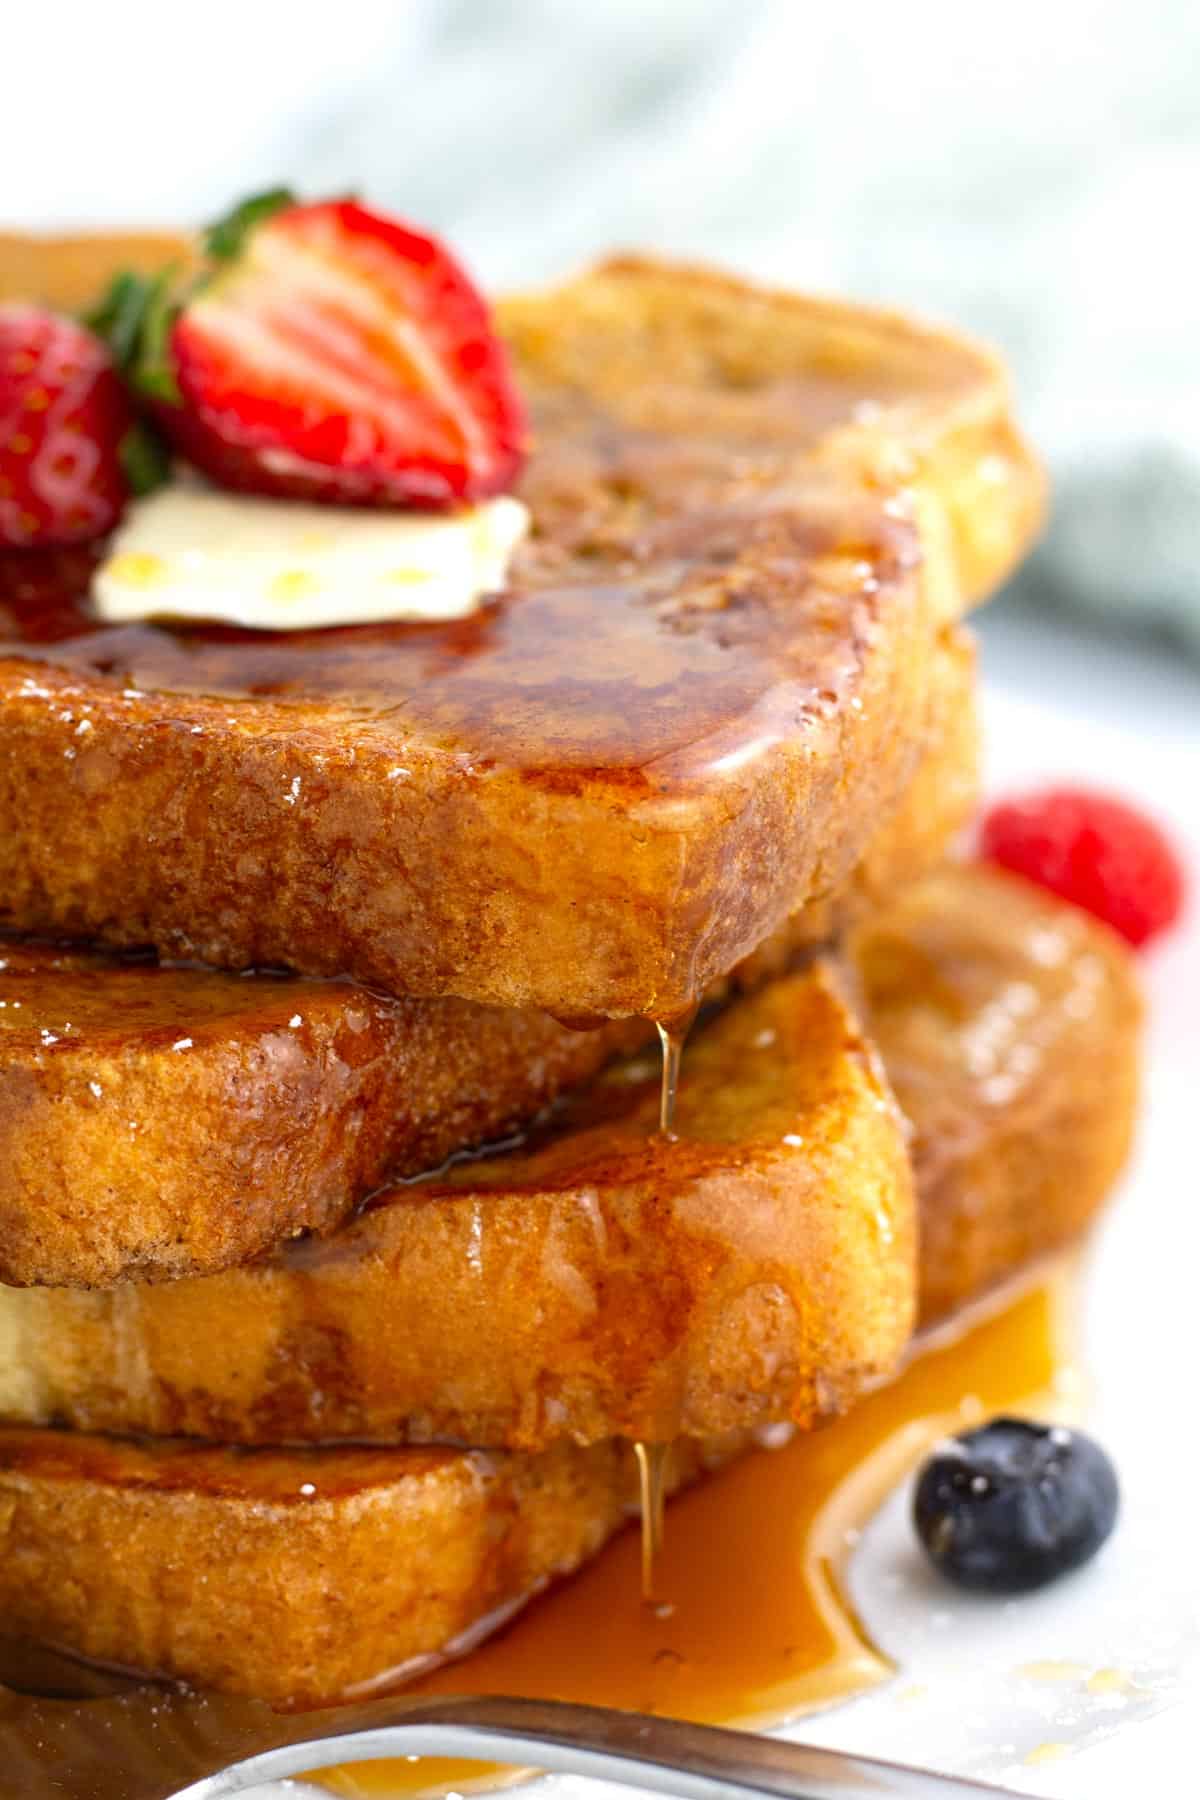 Maple syrup dripping off pieces of classic french toast.